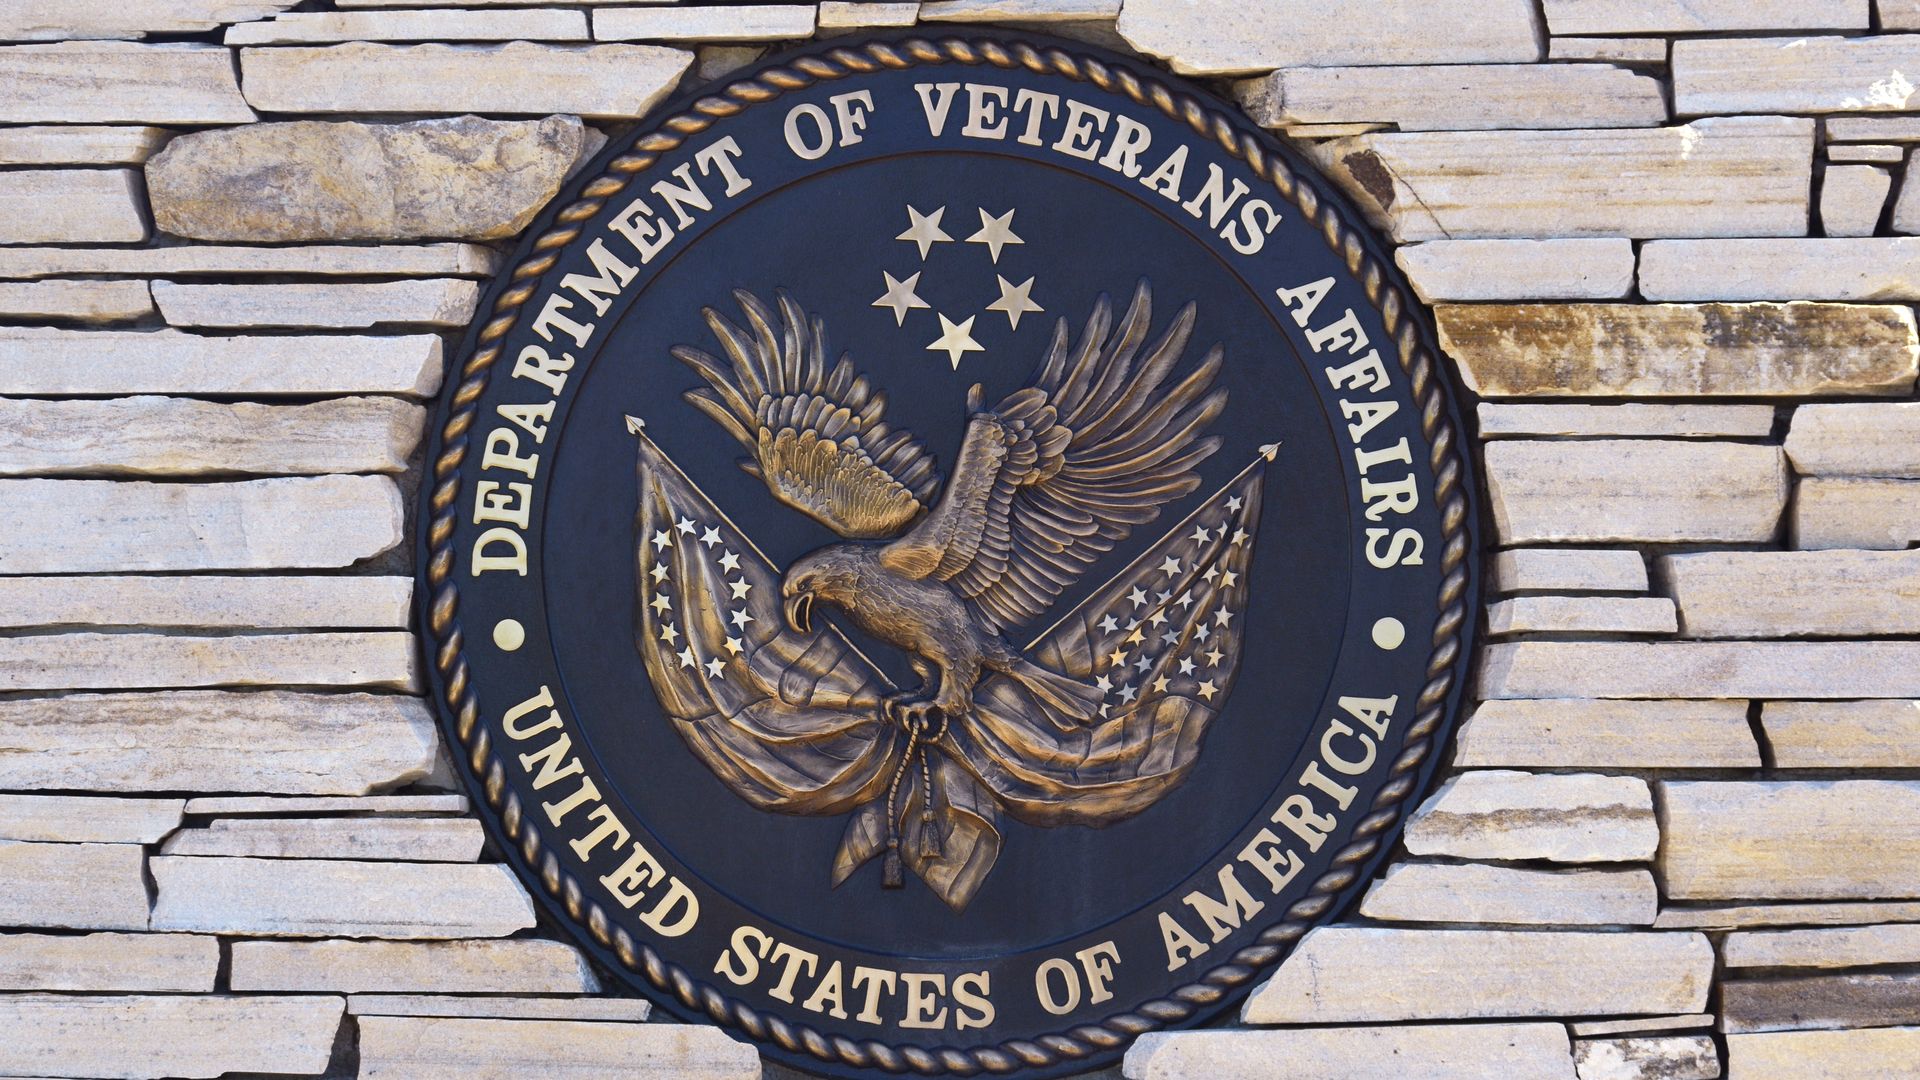 The seal of the United States Department of Veterans Affairs.